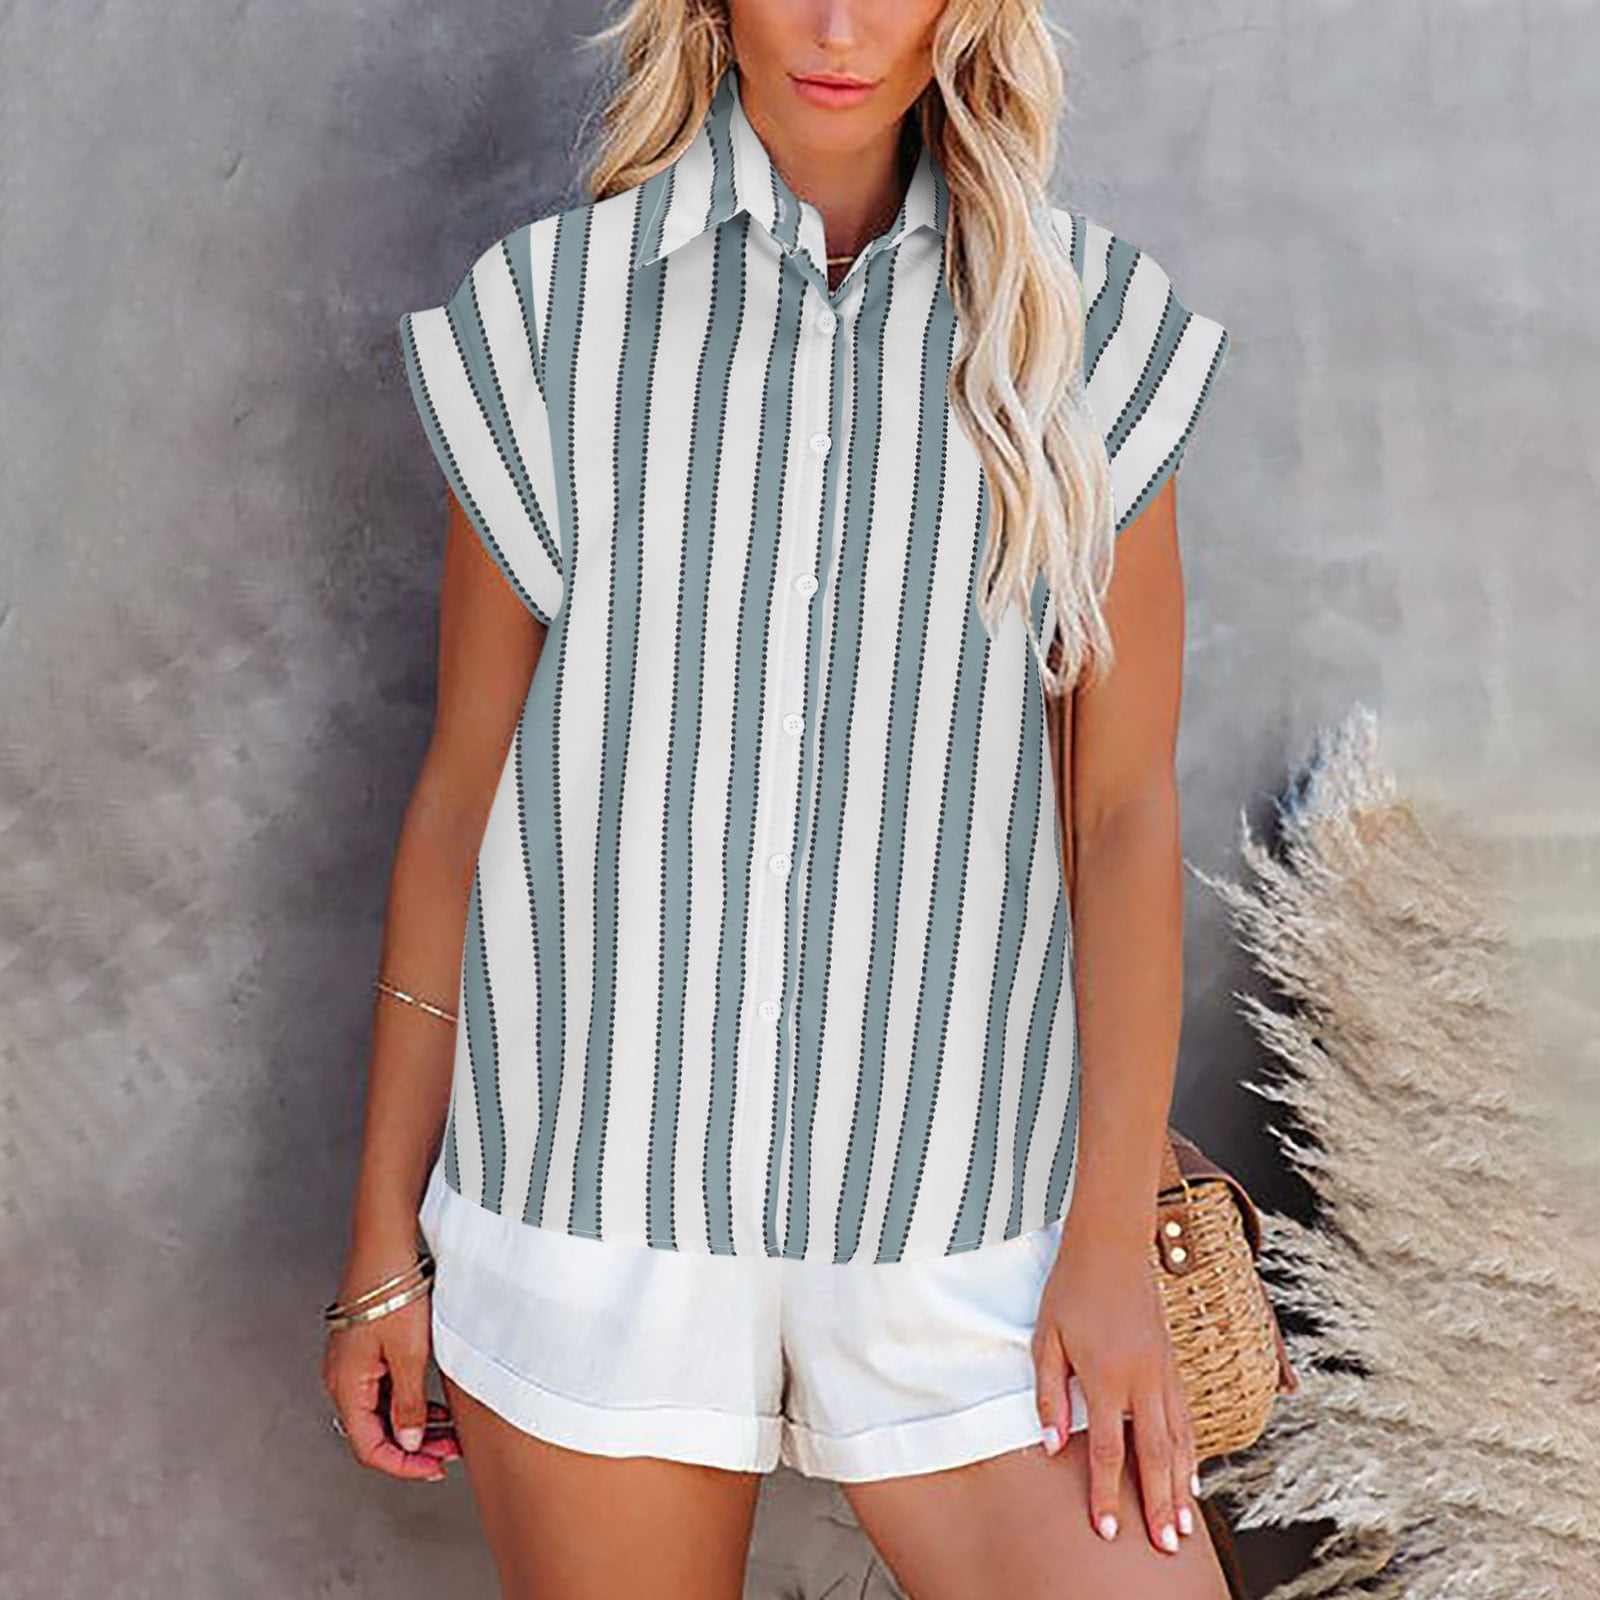 CTEEGC Womens Tops Striped Printed Single Breasted Short Sleeve Shirt  Blouse Tops